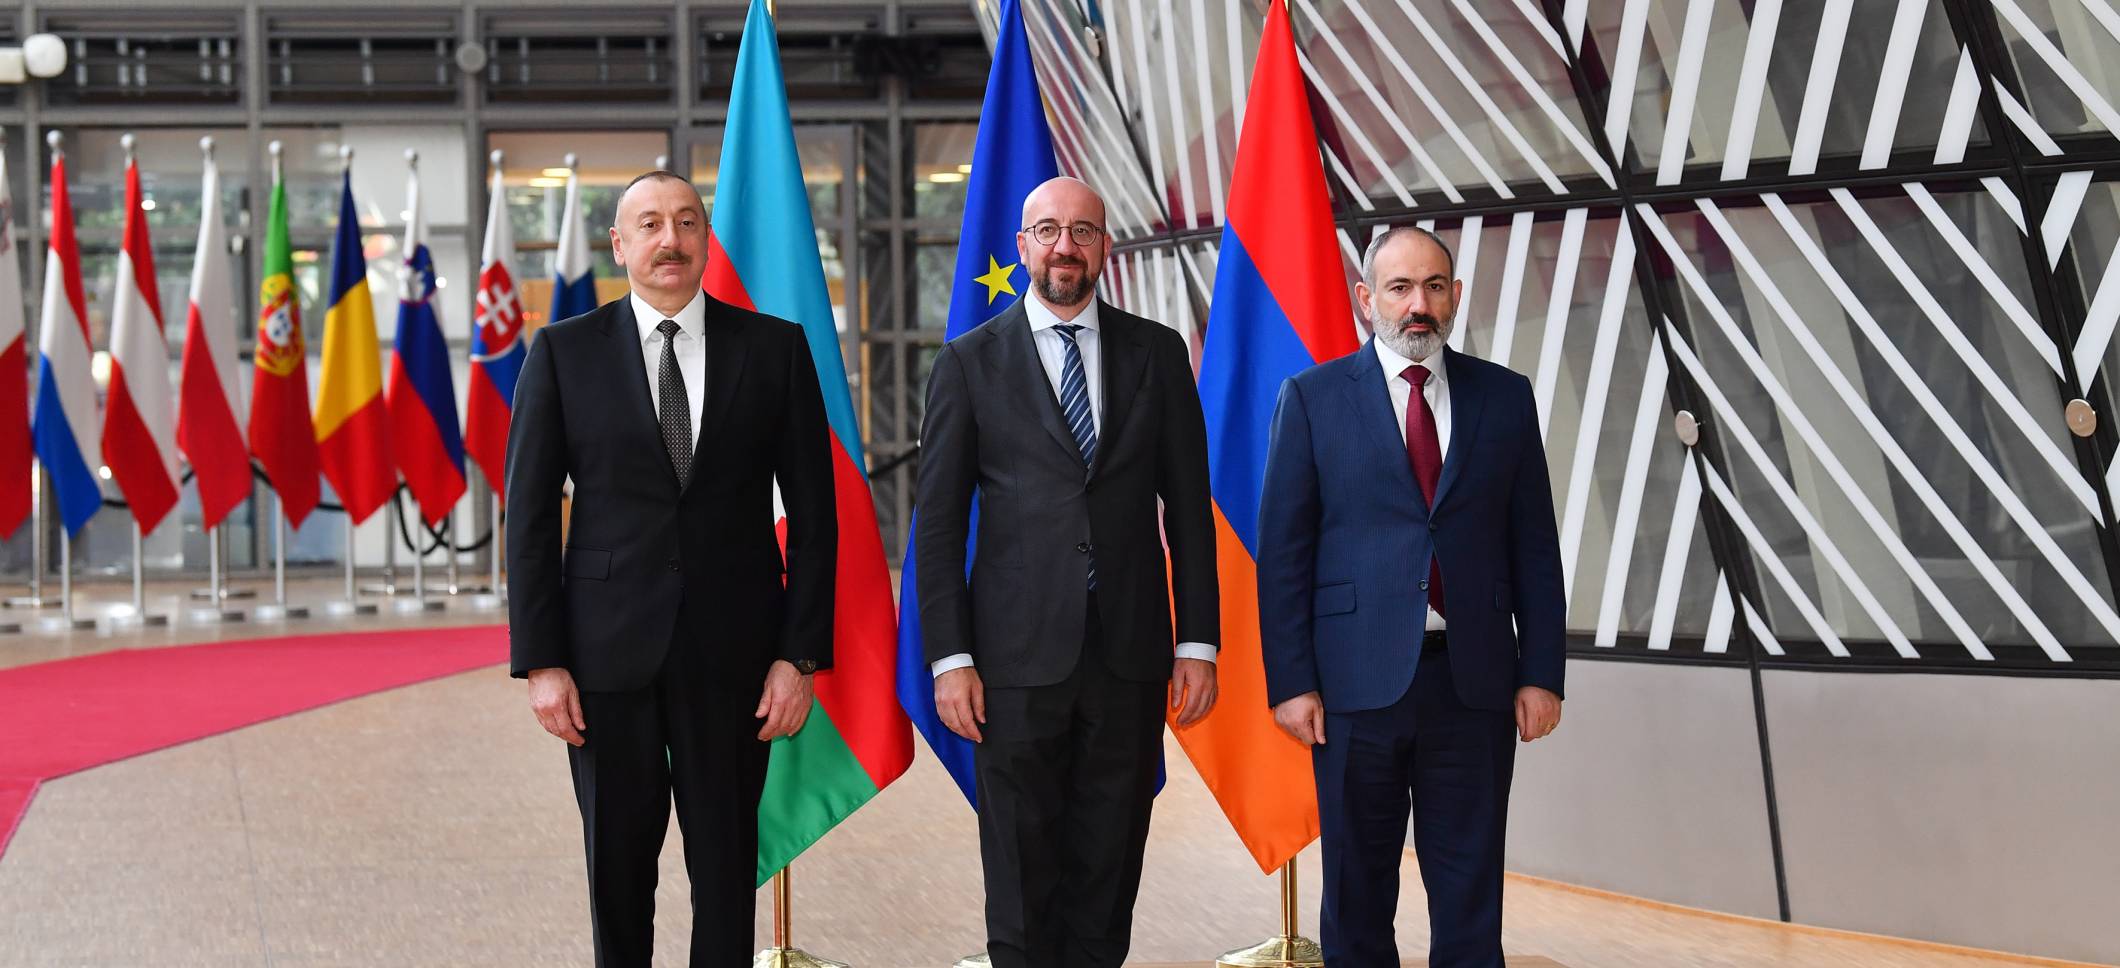 Ilham Aliyev had meeting with President of European Council and Prime Minister of Armenia in Brussels